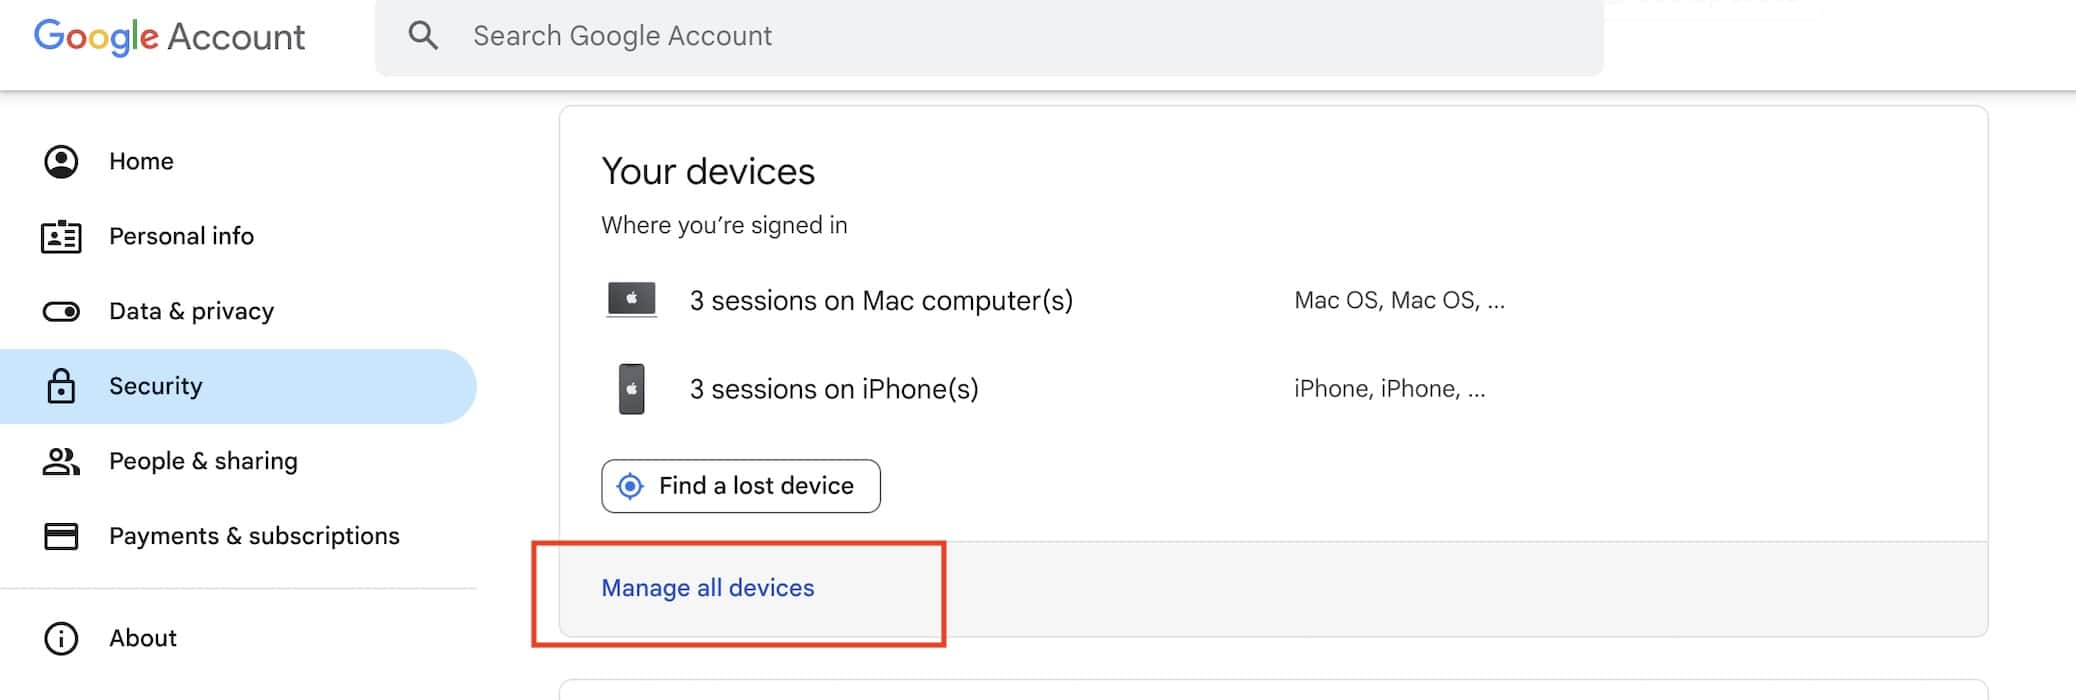 Managing the Logged in Devices on My Google Account